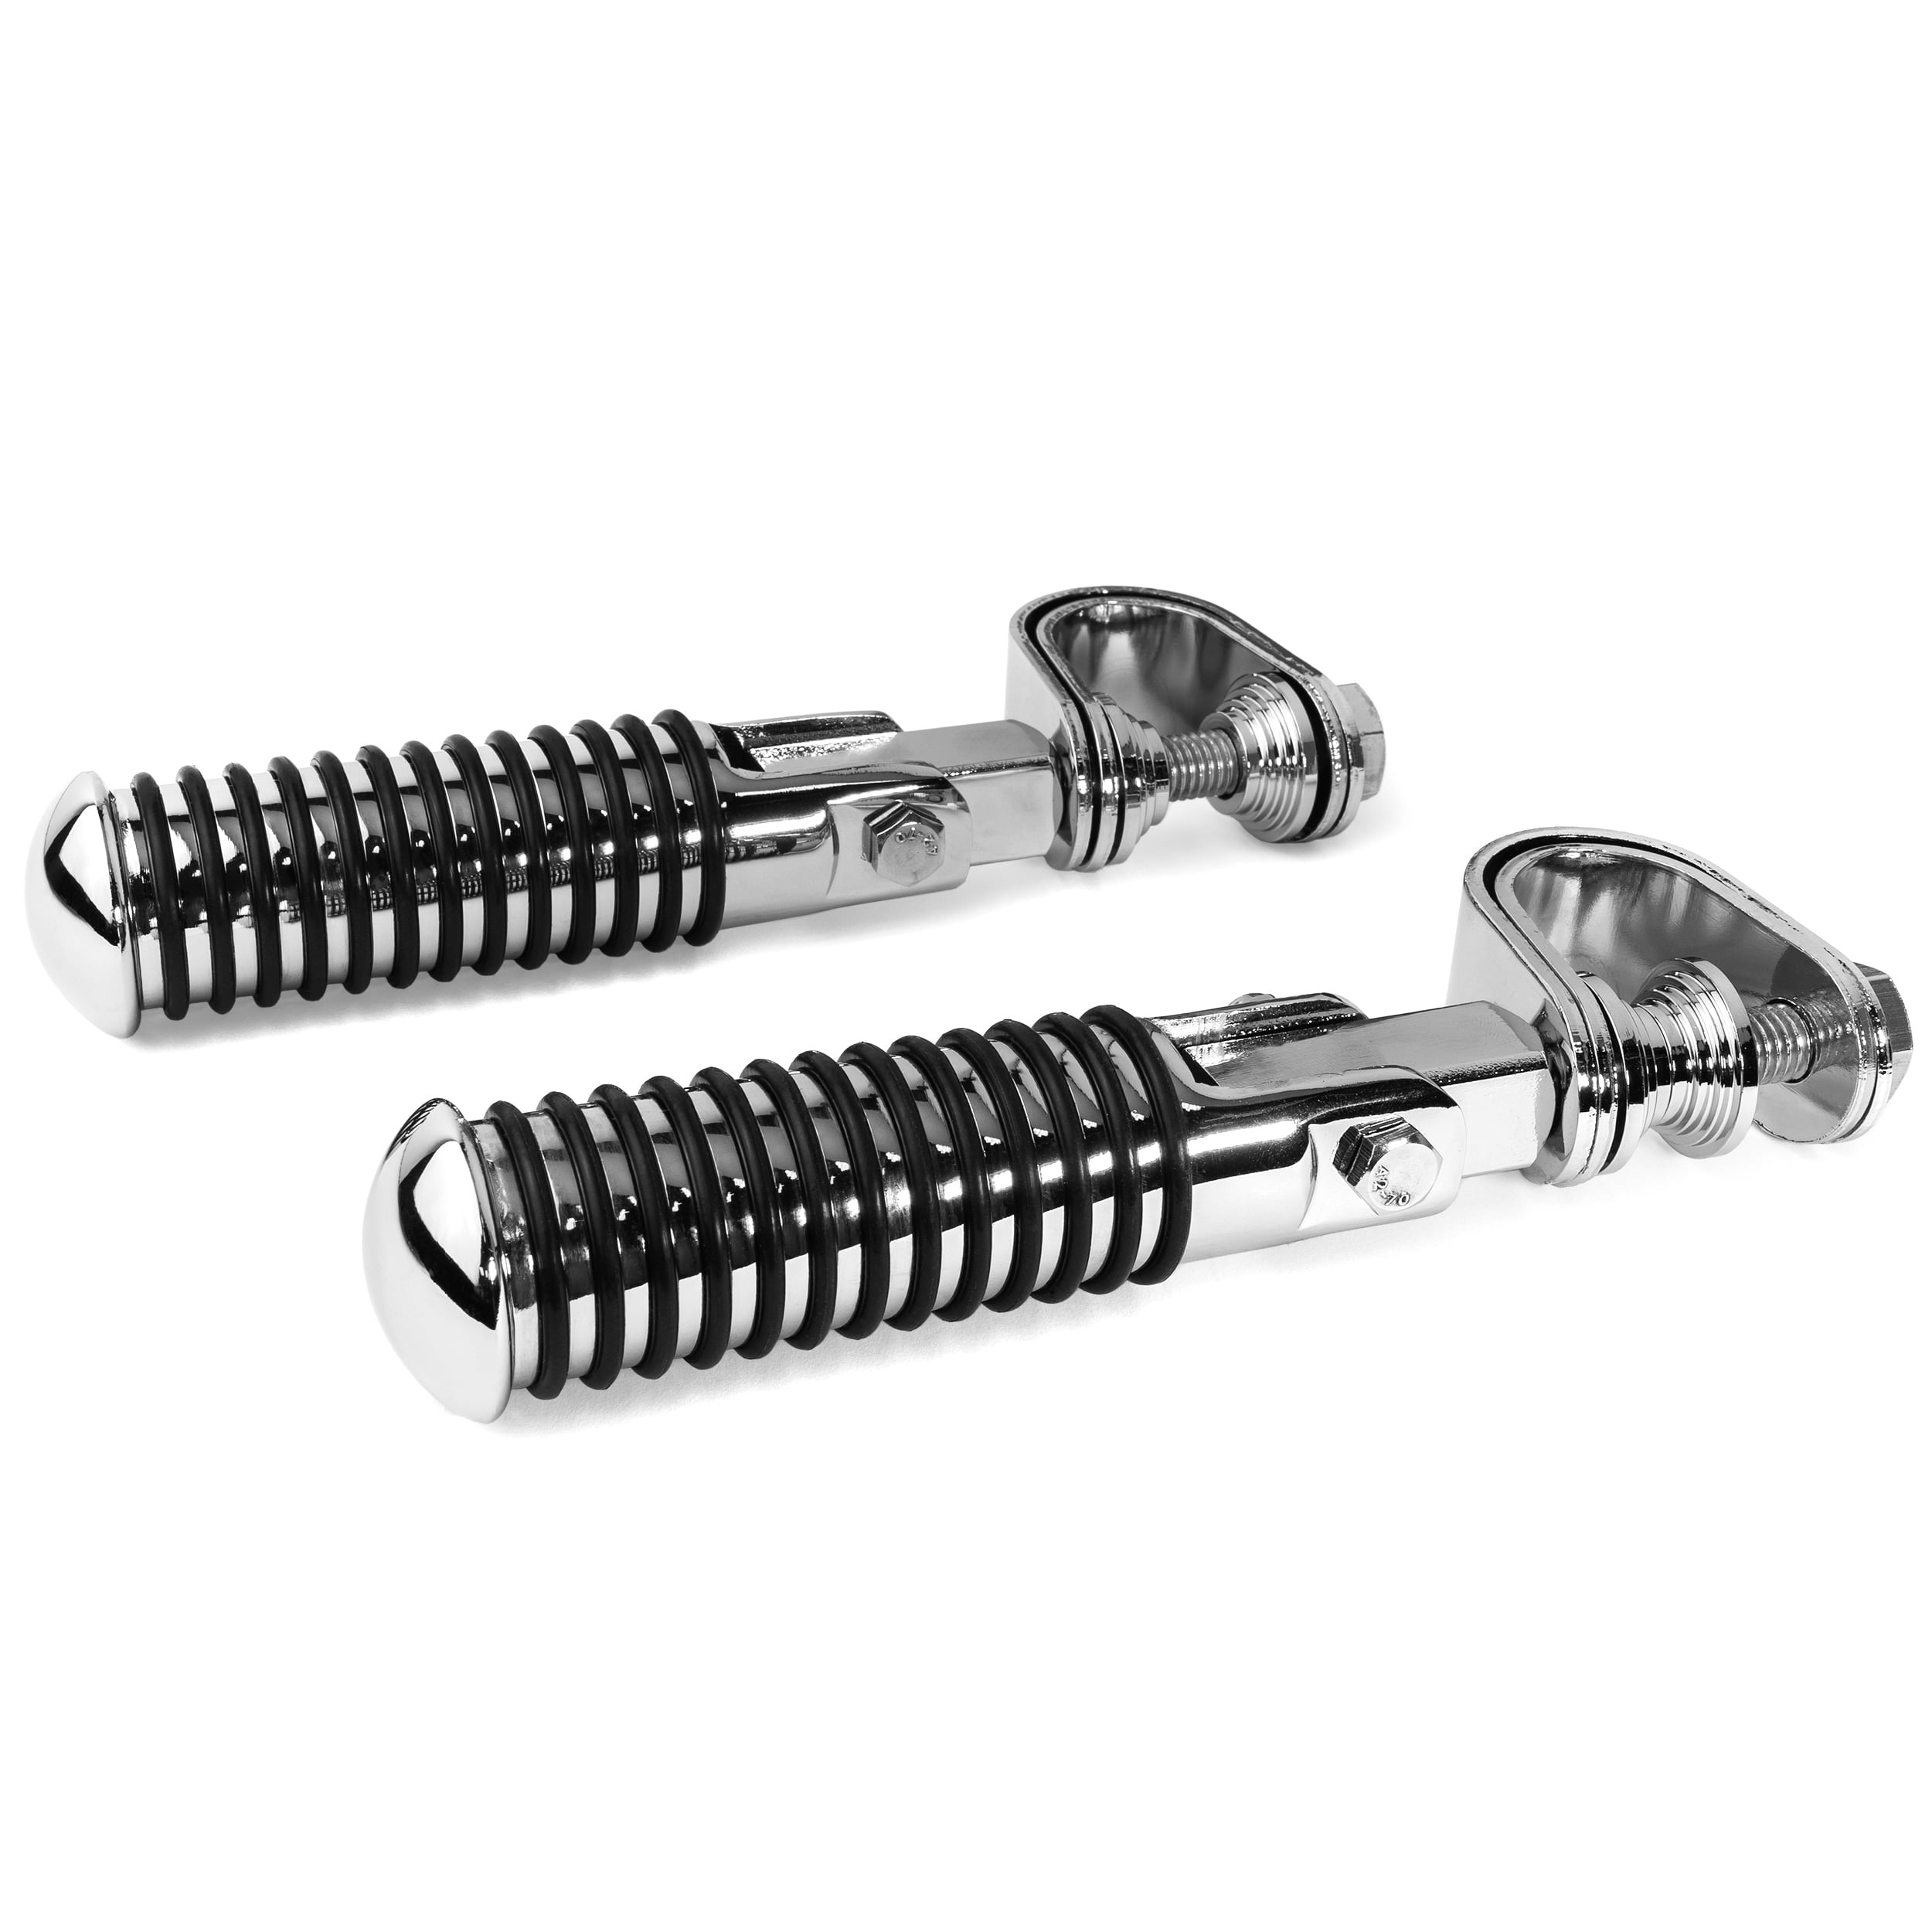 1.25" Chrome Adjustable Highway Crash Bar Foot Pegs For Universal motorcycle 